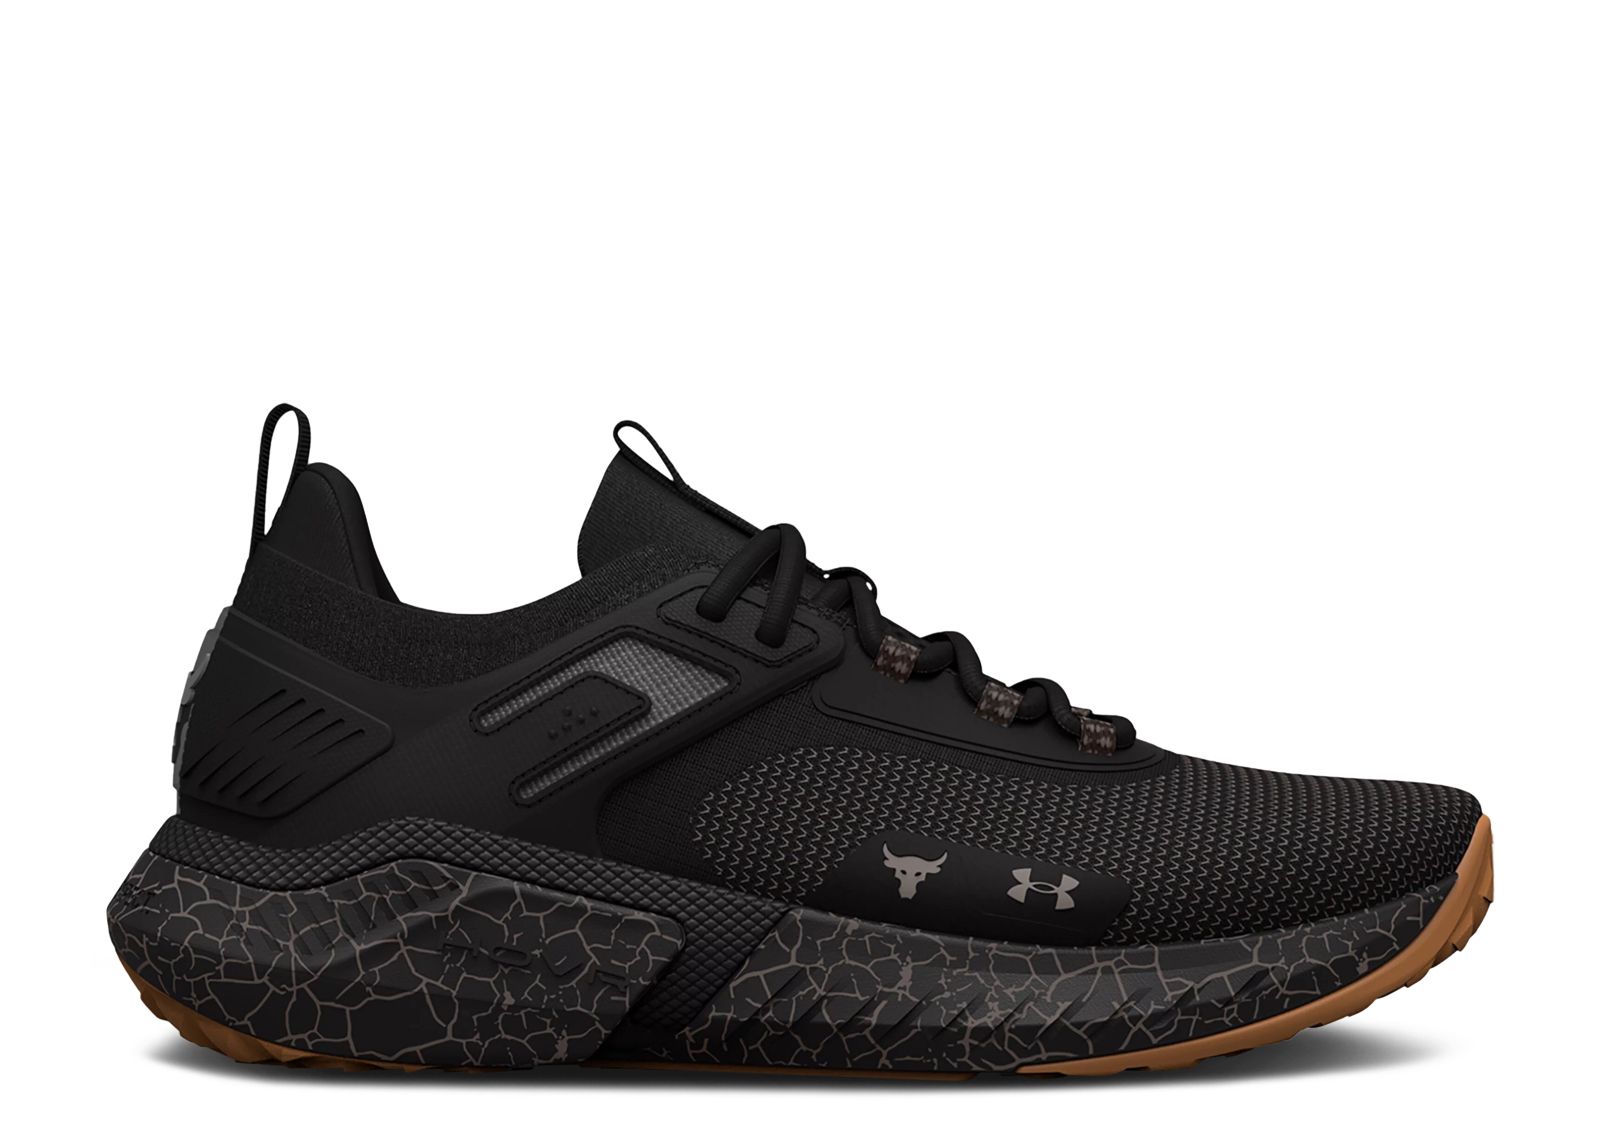 Project Rock 5 'Iron Paradise' - Under Armour - 3026074 001